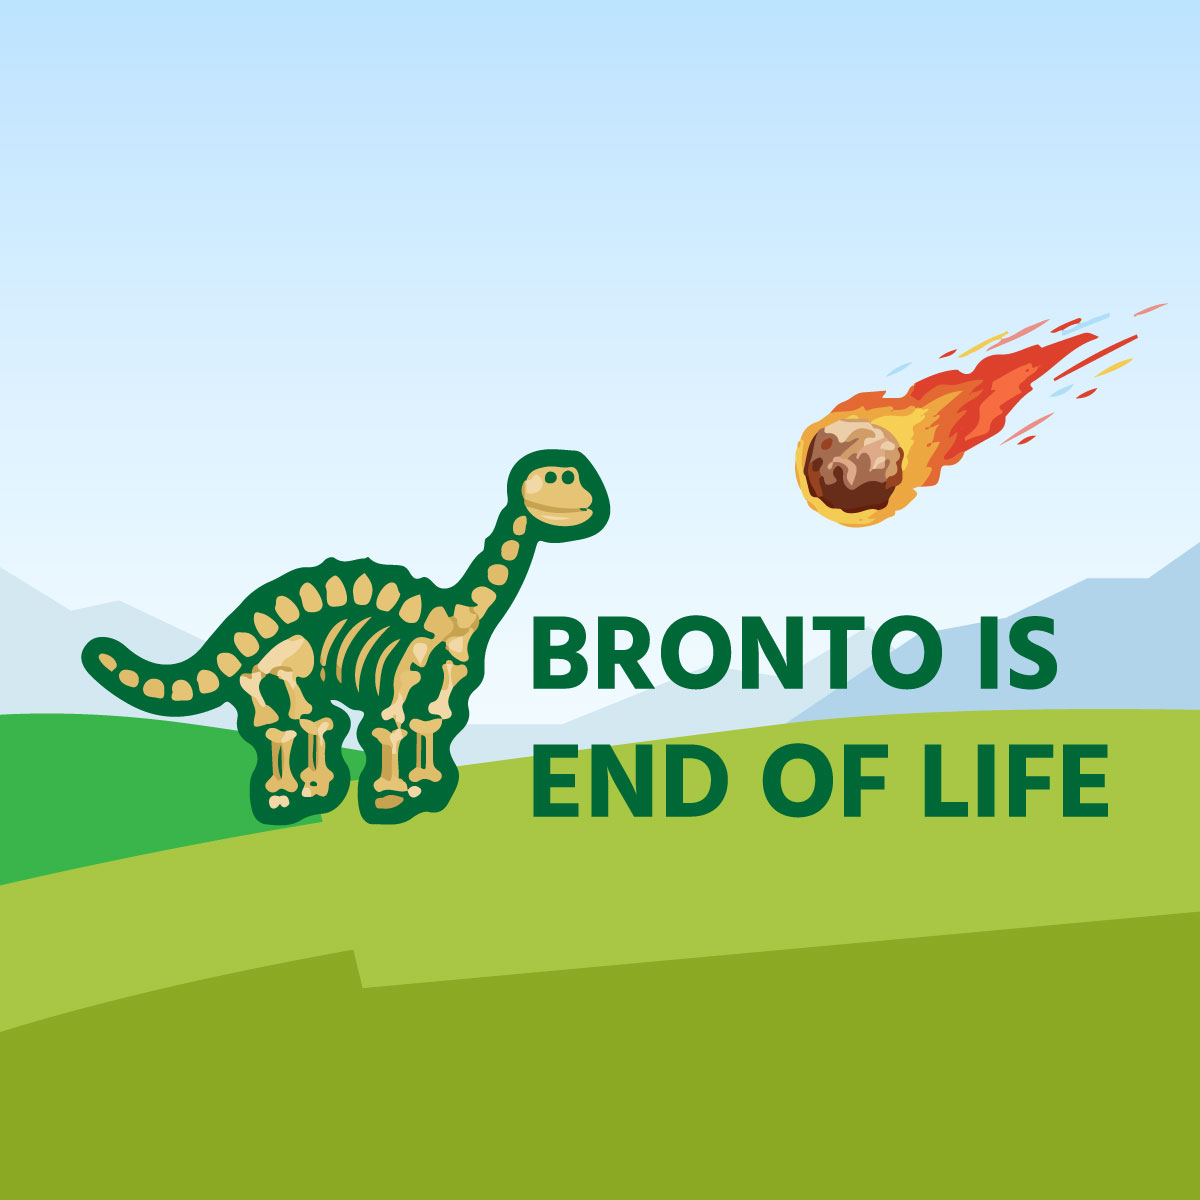 Bronto is end of life